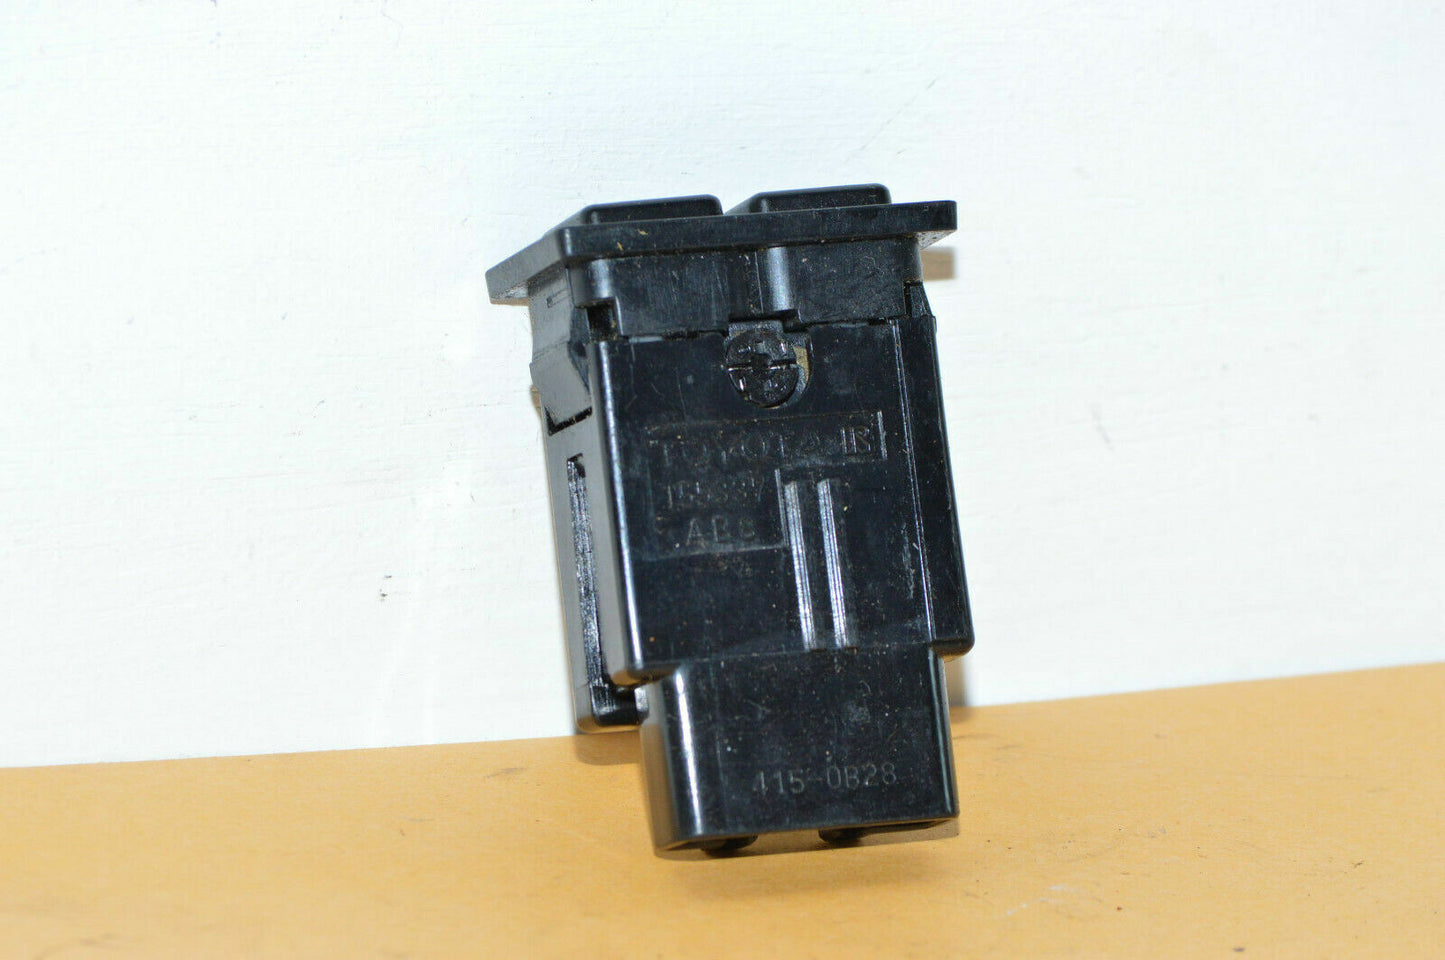 01-05 Lexus Is300 Power Snow Traction Pattern Select Switch 84720-53010 Oem Used